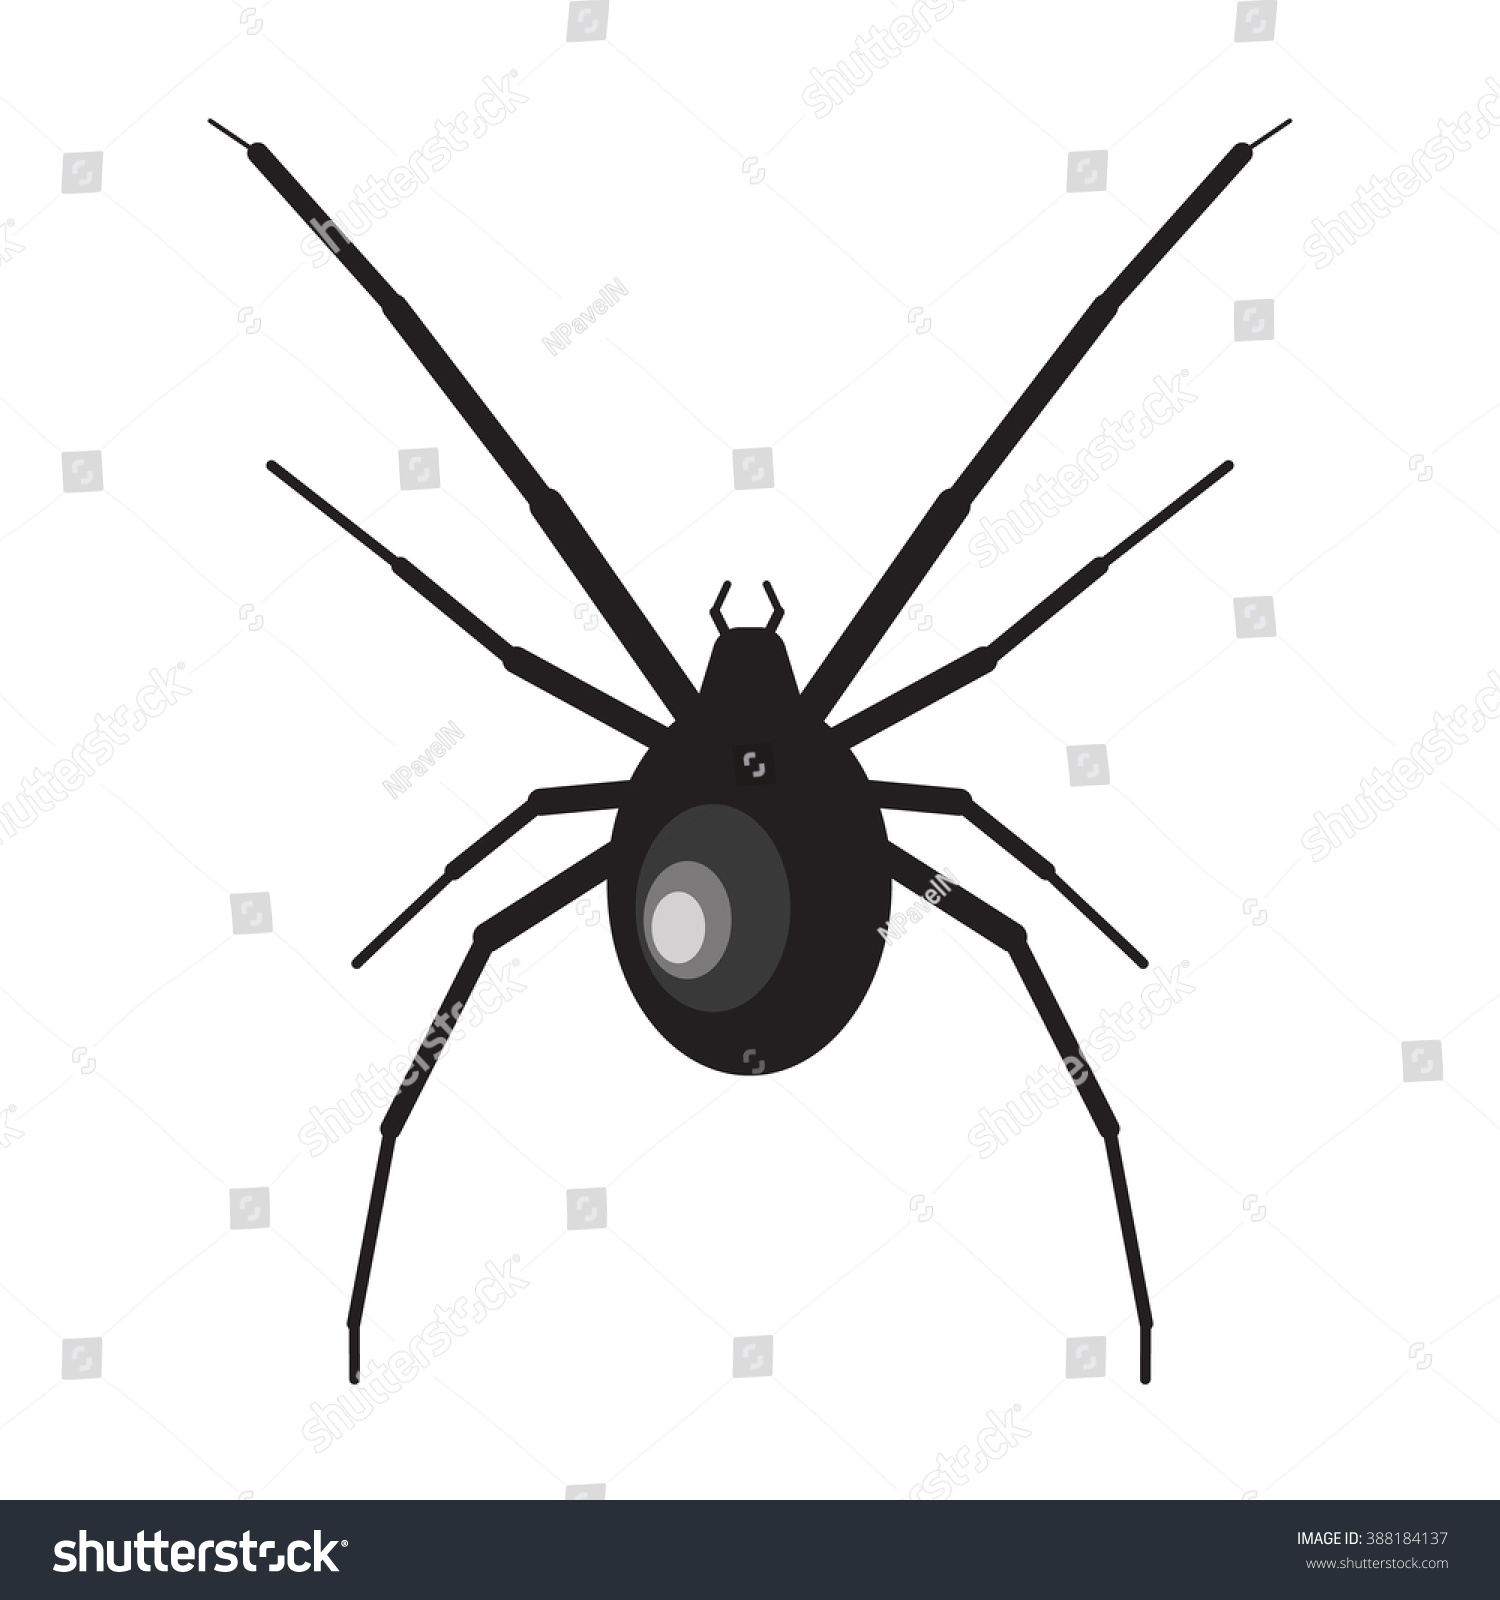 Black Widow Spider Illustration Isolated On Stock Vector 388184137 ...